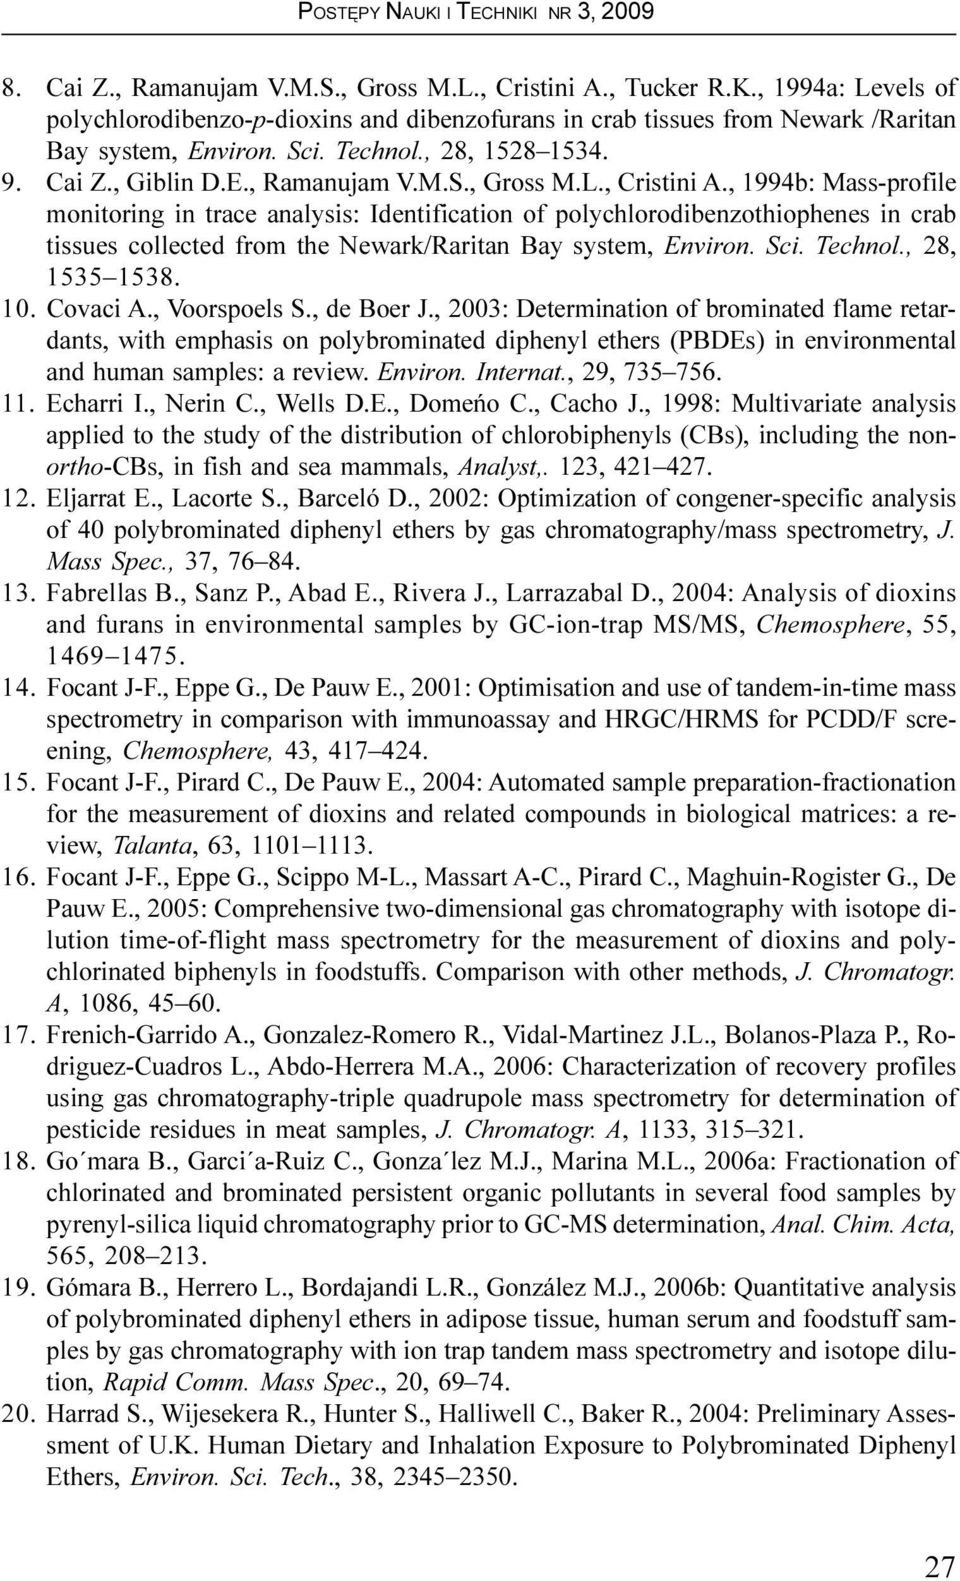 , 1994b: Mass-profile monitoring in trace analysis: Identification of polychlorodibenzothiophenes in crab tissues collected from the Newark/Raritan Bay system, Environ. Sci. Technol., 28, 1535 1538.